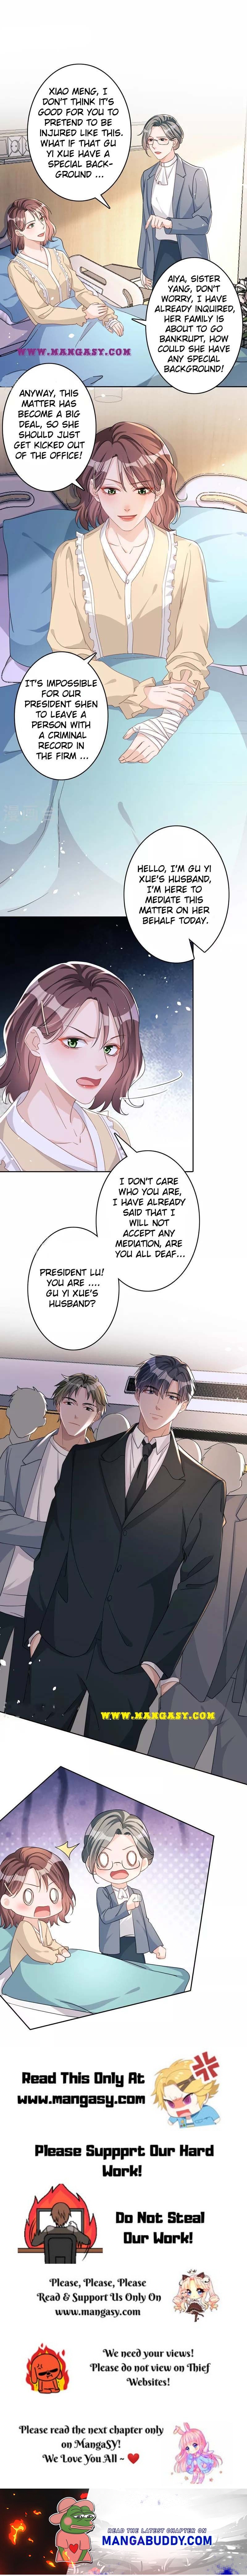 Did You Reject Mr.lu Today? Chapter 46 - HolyManga.net